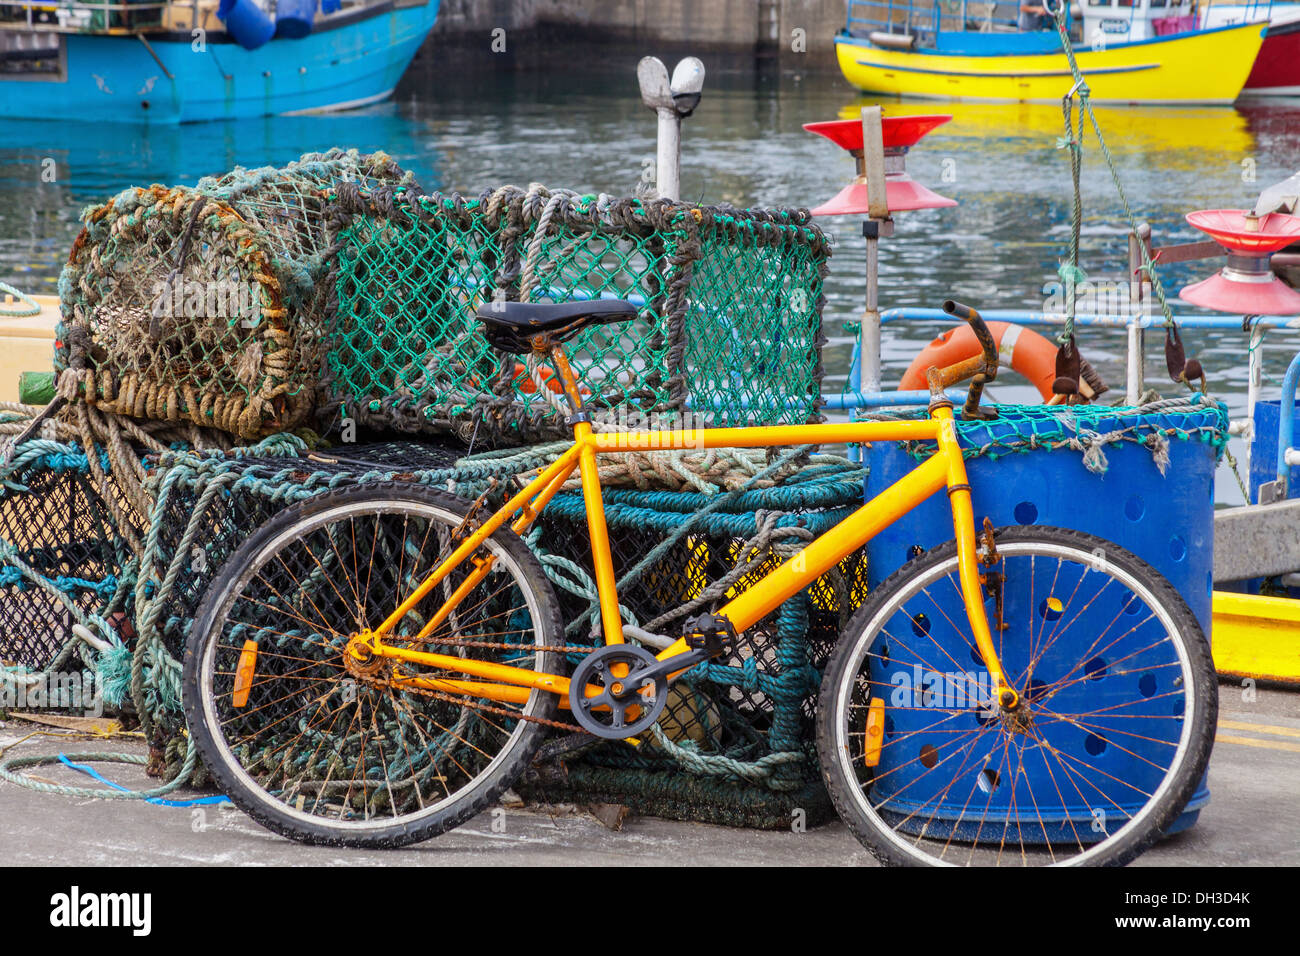 A rusty bicycle is parked by the lobster traps at Fraserburgh Harbour, Fraserburgh, Aberdeenshire, Scotland. Stock Photo